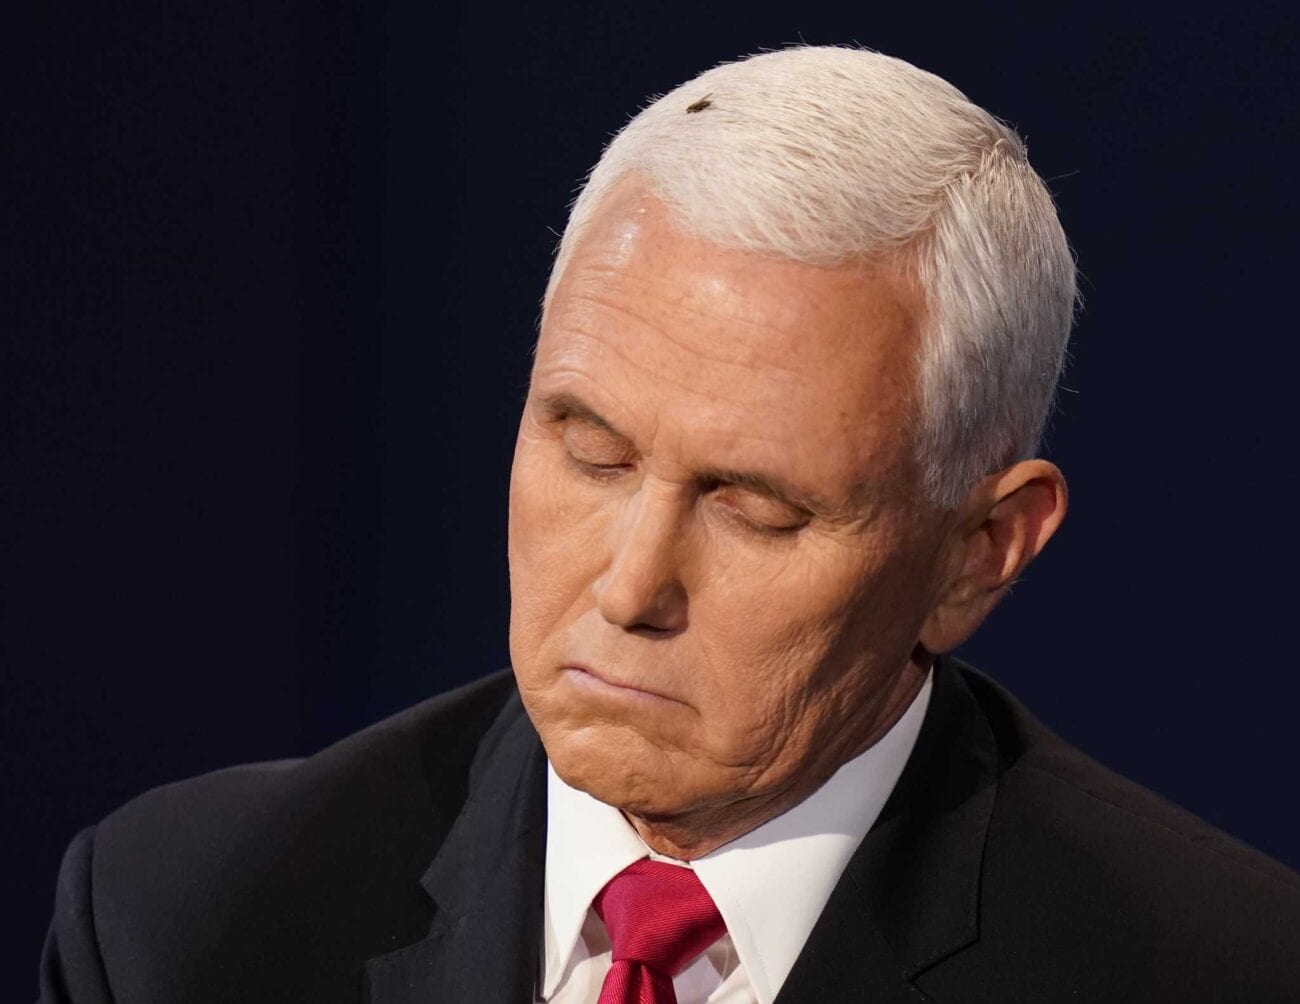 America agrees the fly on Mike Pence won the debate last night. Check out the funniest memes buzzing around the internet about it.